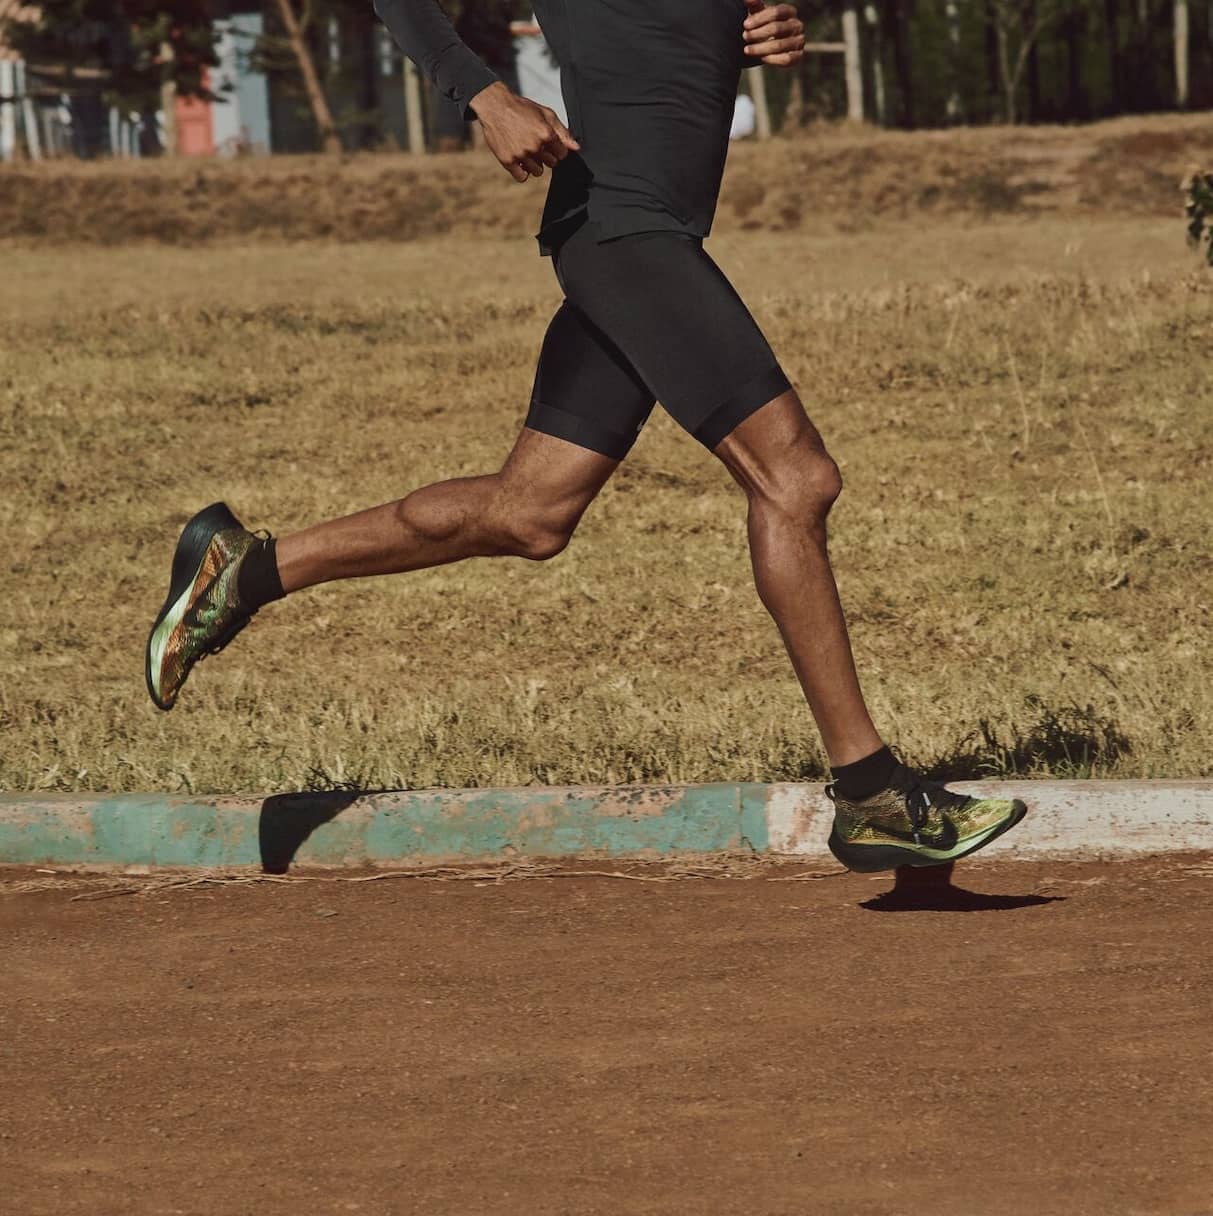 Runner's Guide to Wearing Compression Shorts. Nike.com